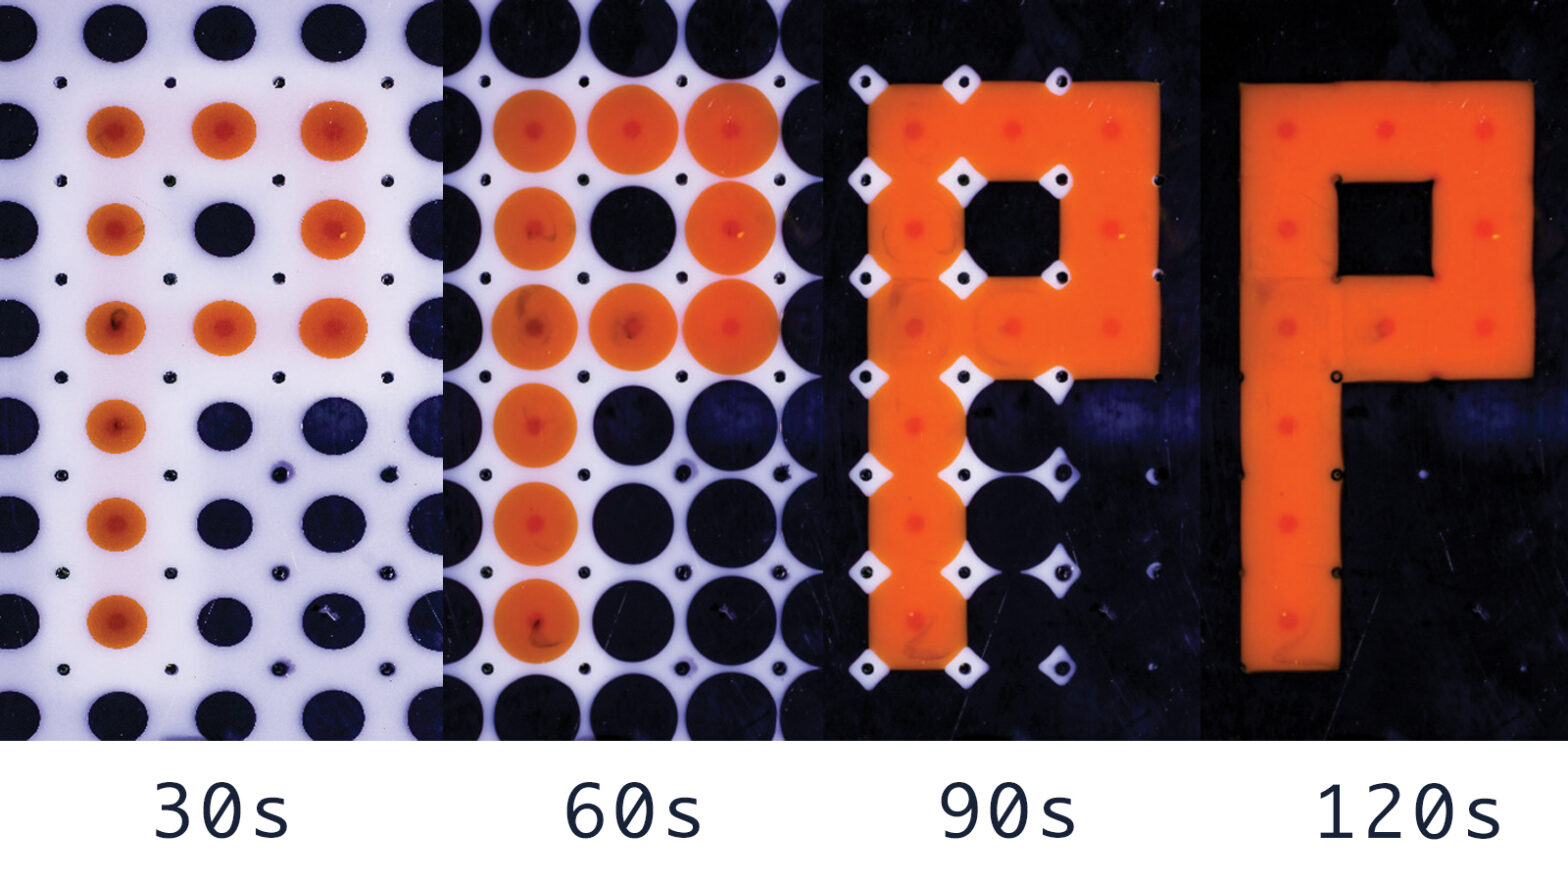 four images showing progress of dots spreading to form a composite P